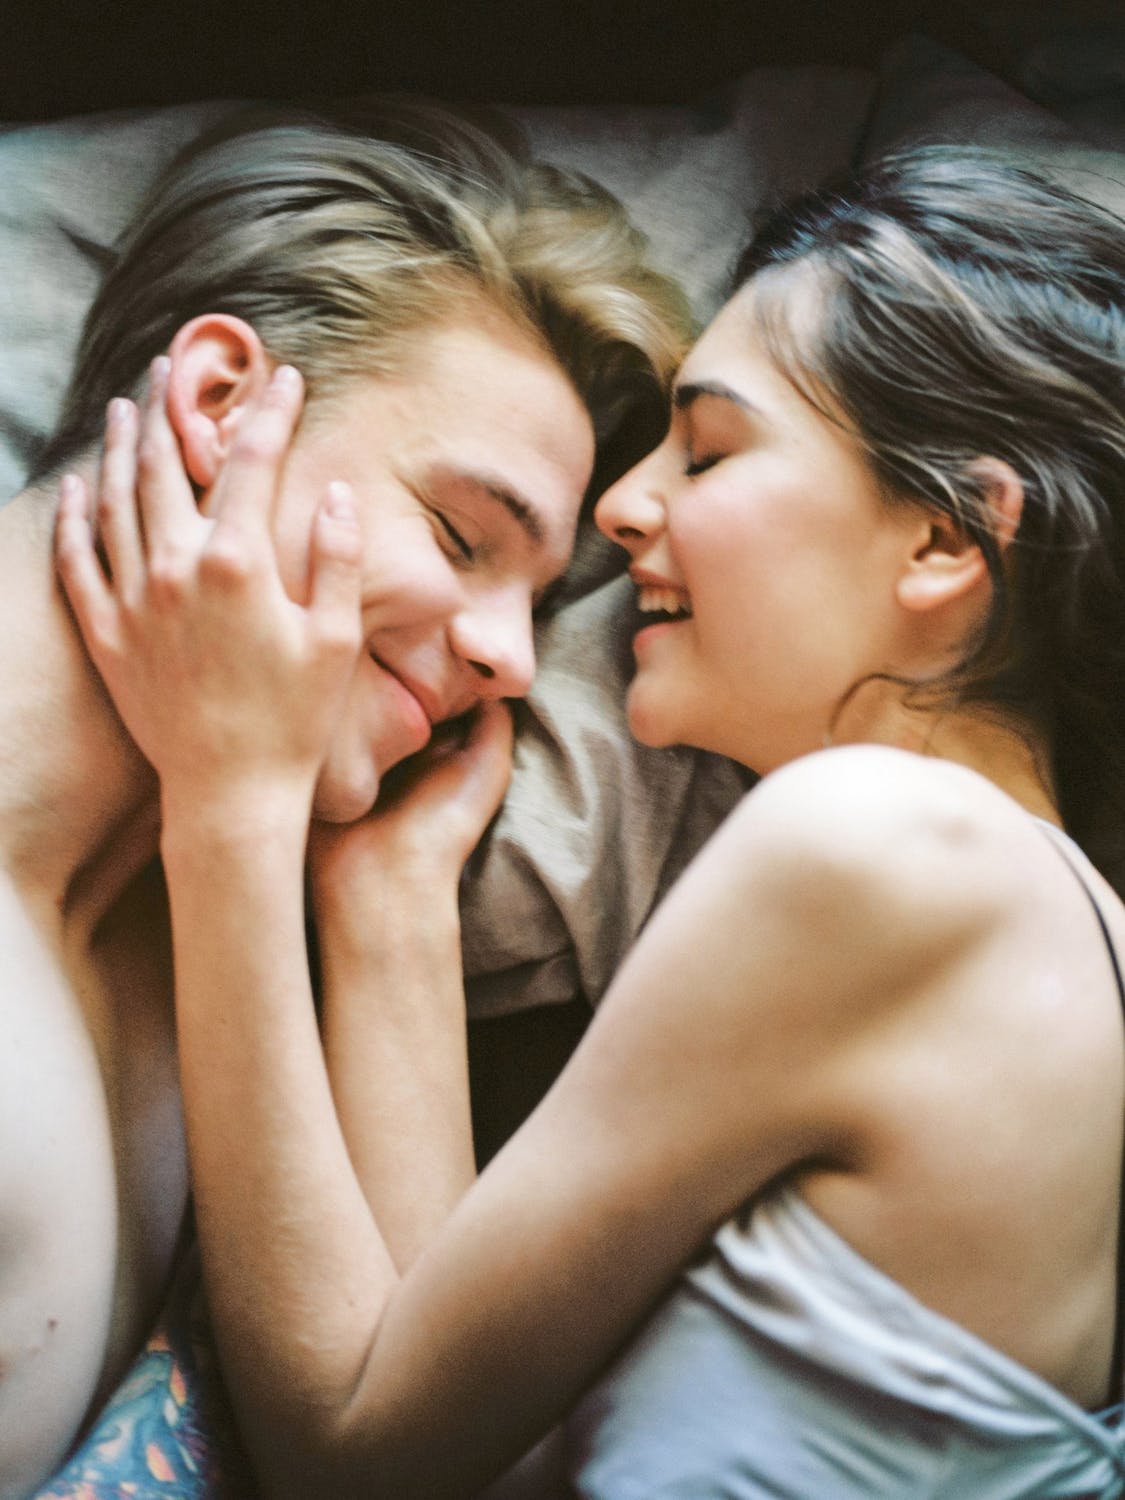 5 Ways to Improve Sex for Men with Low Testosterone